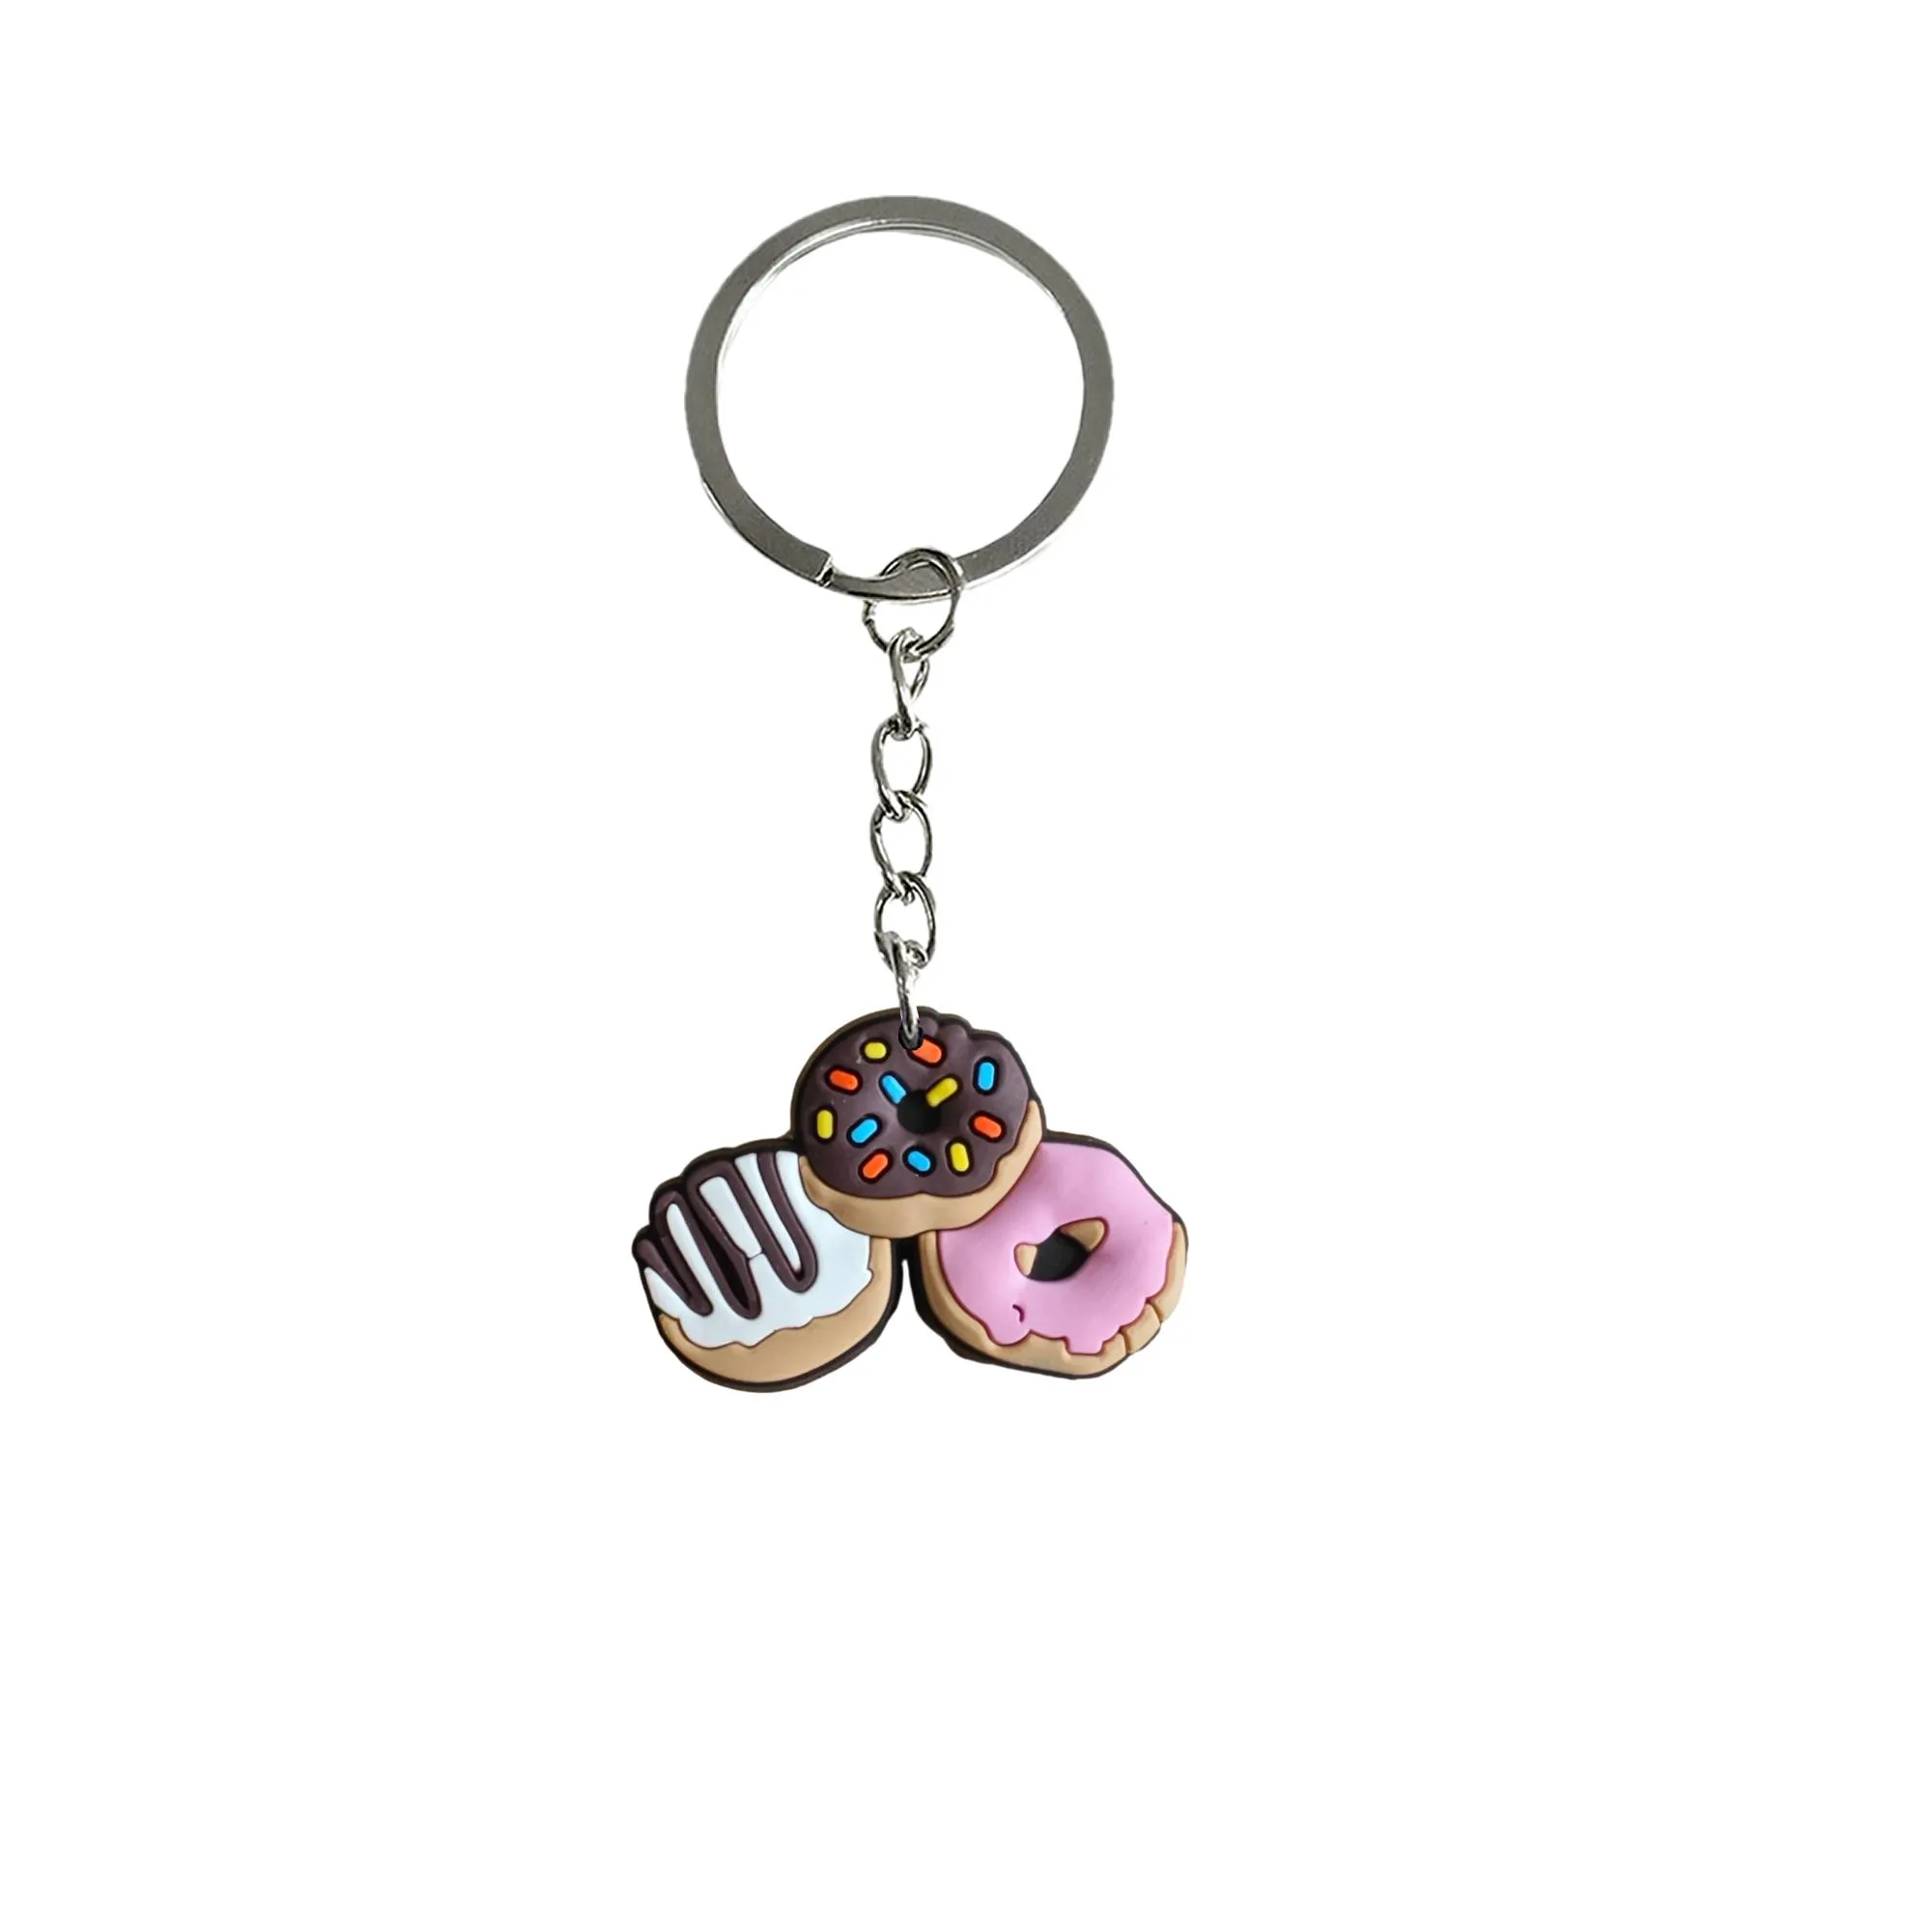 donuts keychain for classroom prizes boys keychains keyring men suitable schoolbag goodie bag stuffers supplies key ring women car